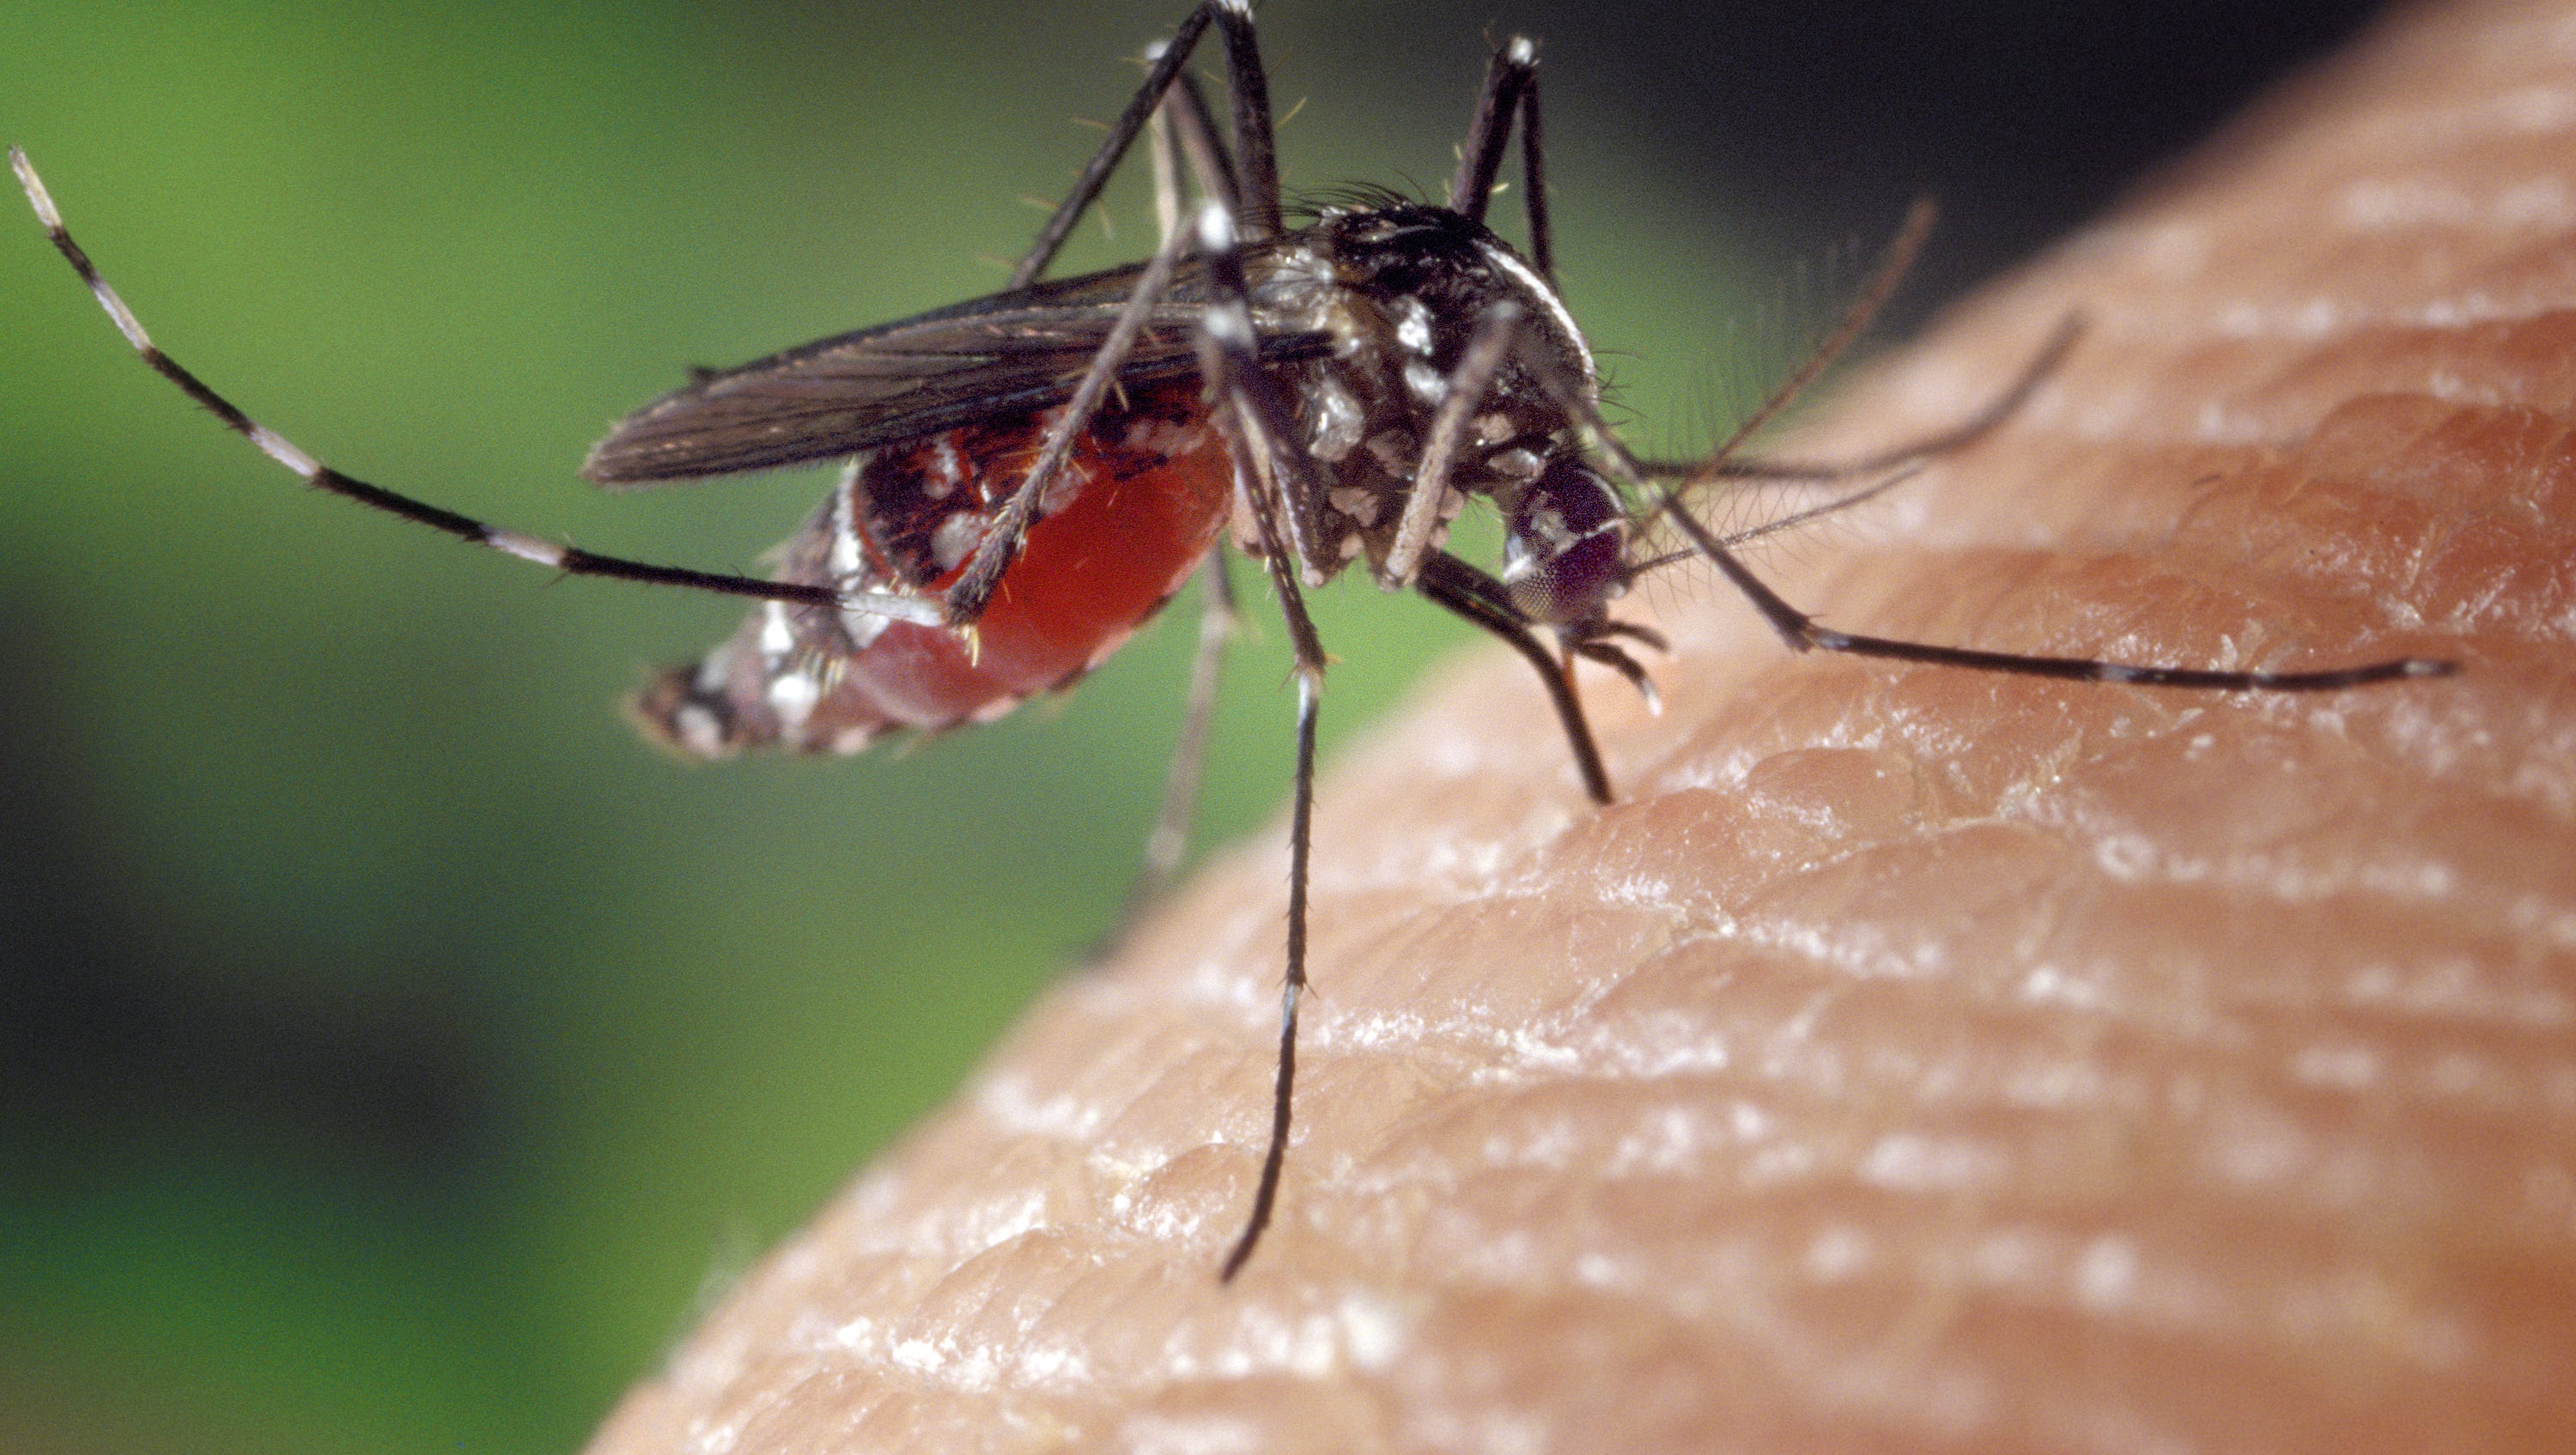 Some mosquitoes can spread illnesses, such as West Nile virus and the Zika virus. The second mosquito capable of carrying the Zika virus was found in the state.